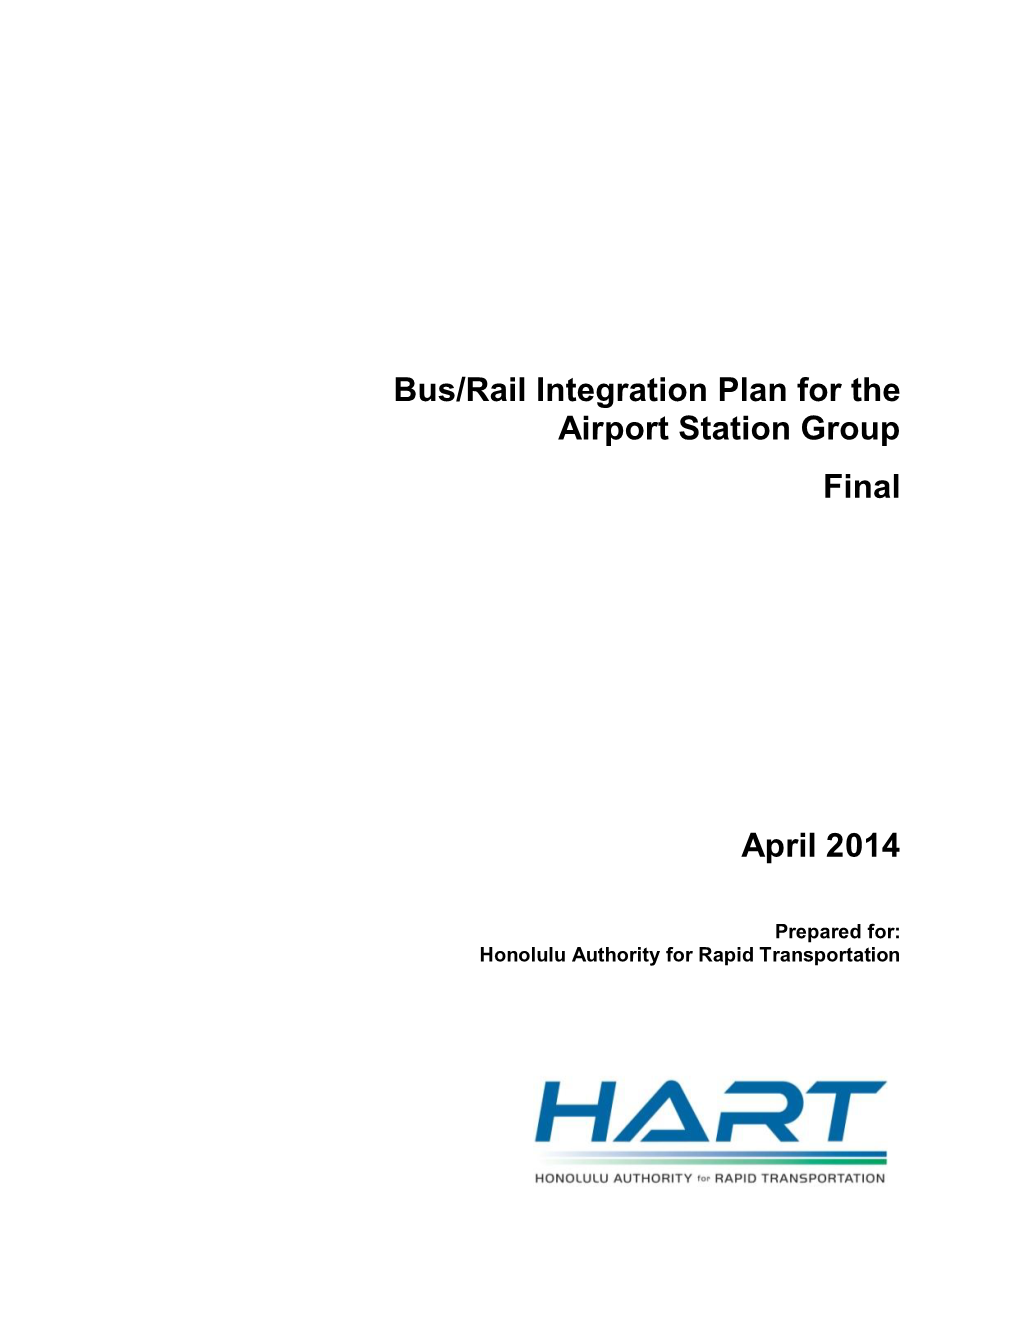 Bus/Rail Integration Plan for the Airport Station Group Final